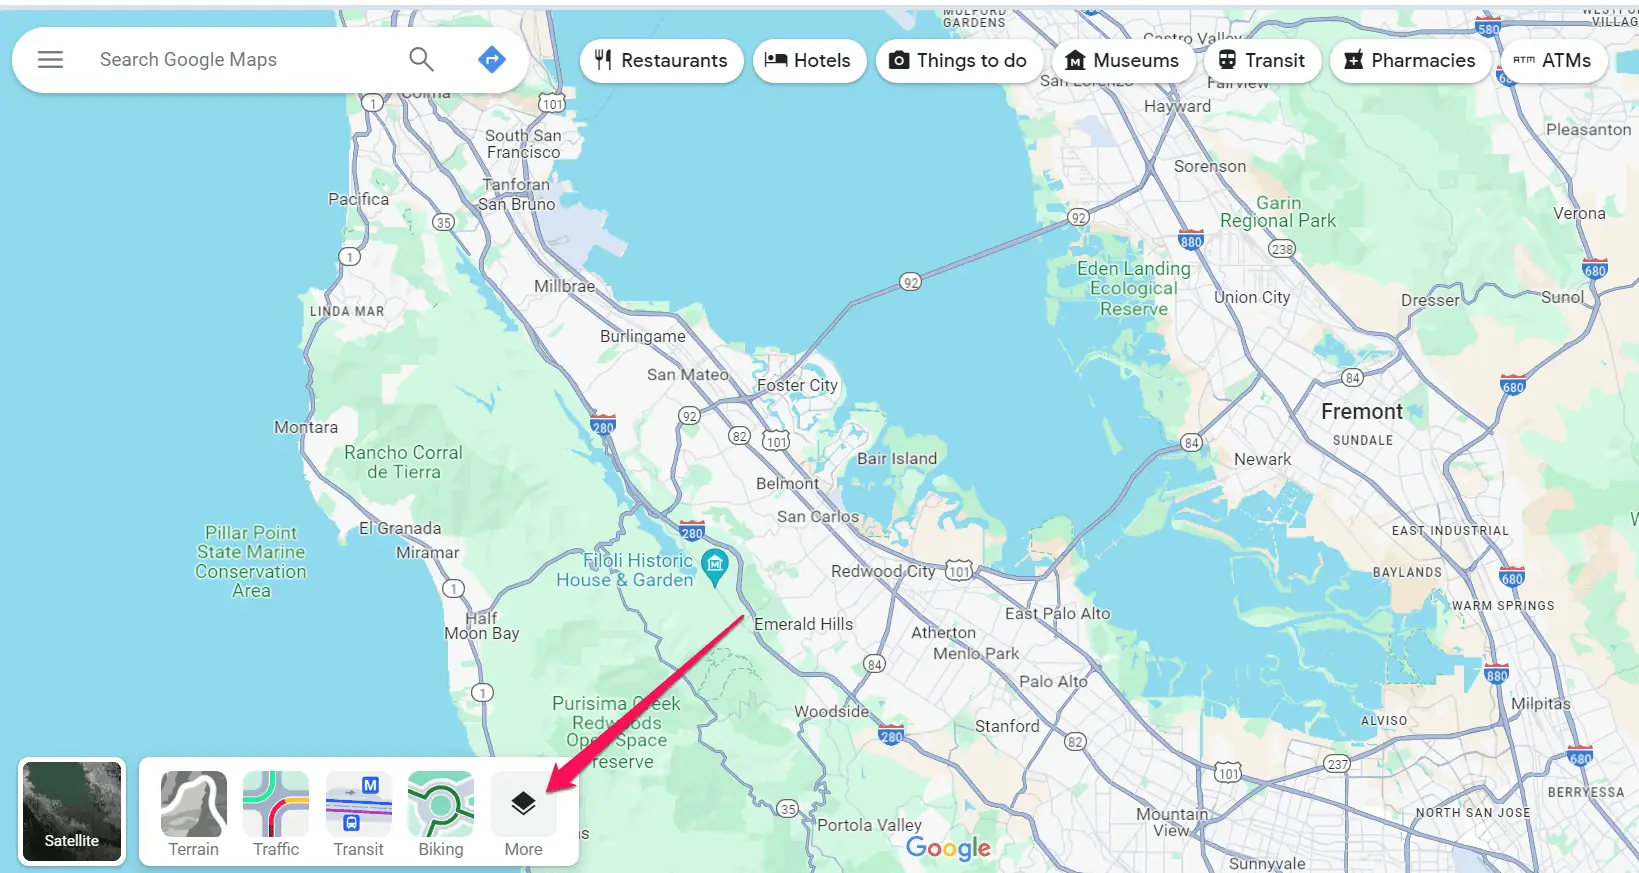 Switching layers in Google Maps